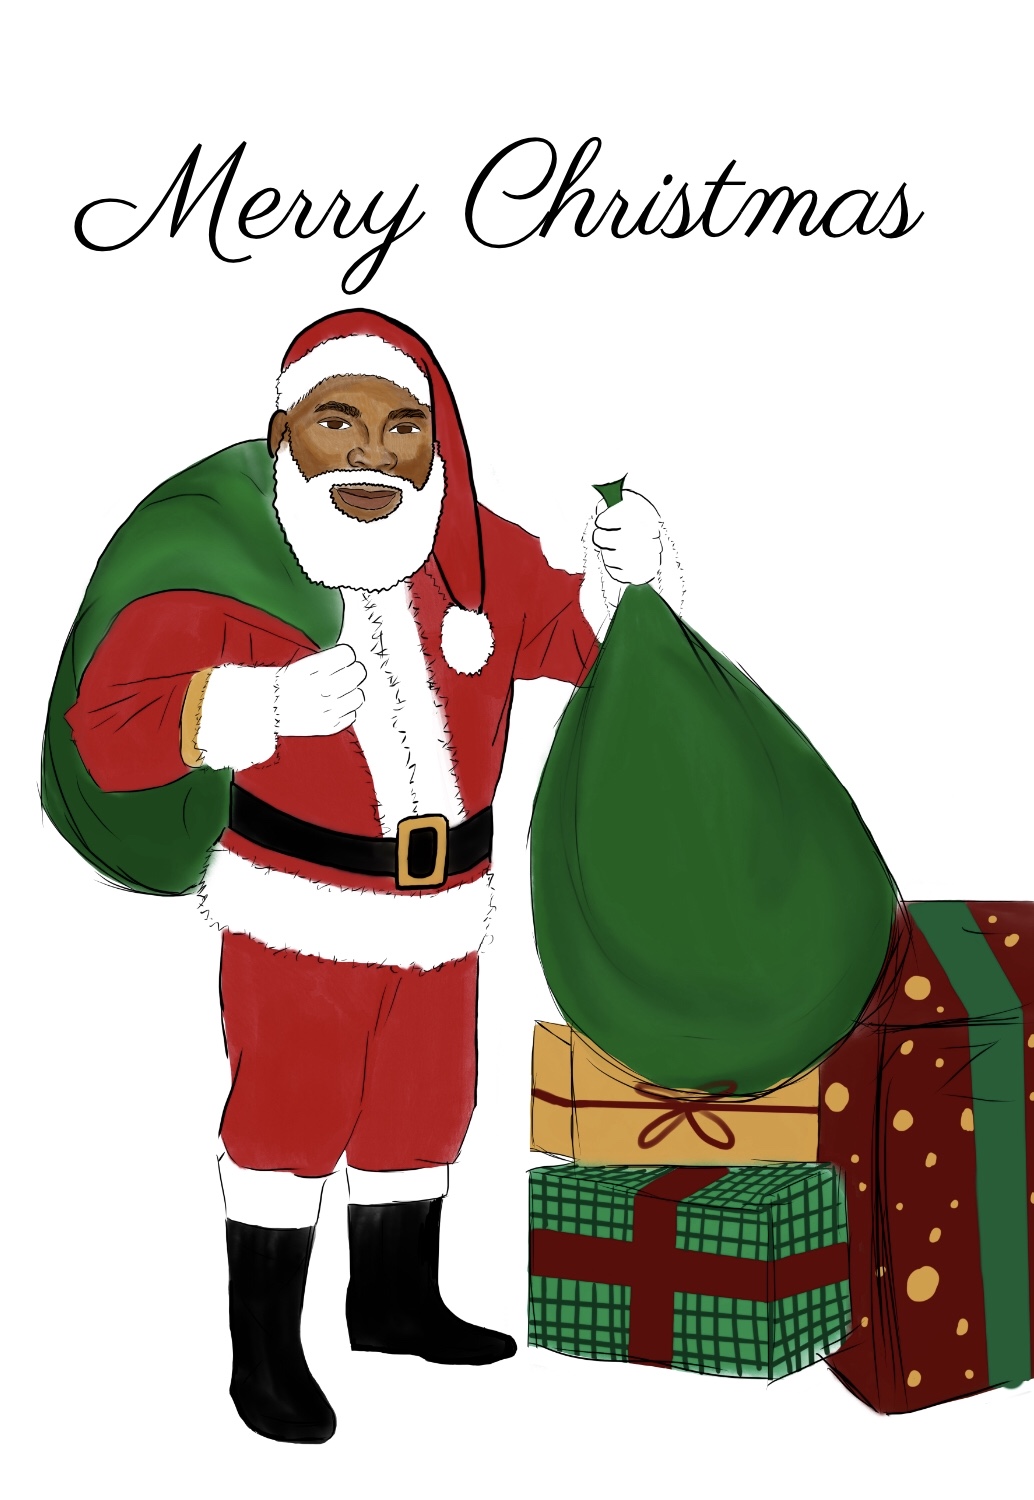 Merry Christmas Card featuring an African American Santa Claus holding gifts.